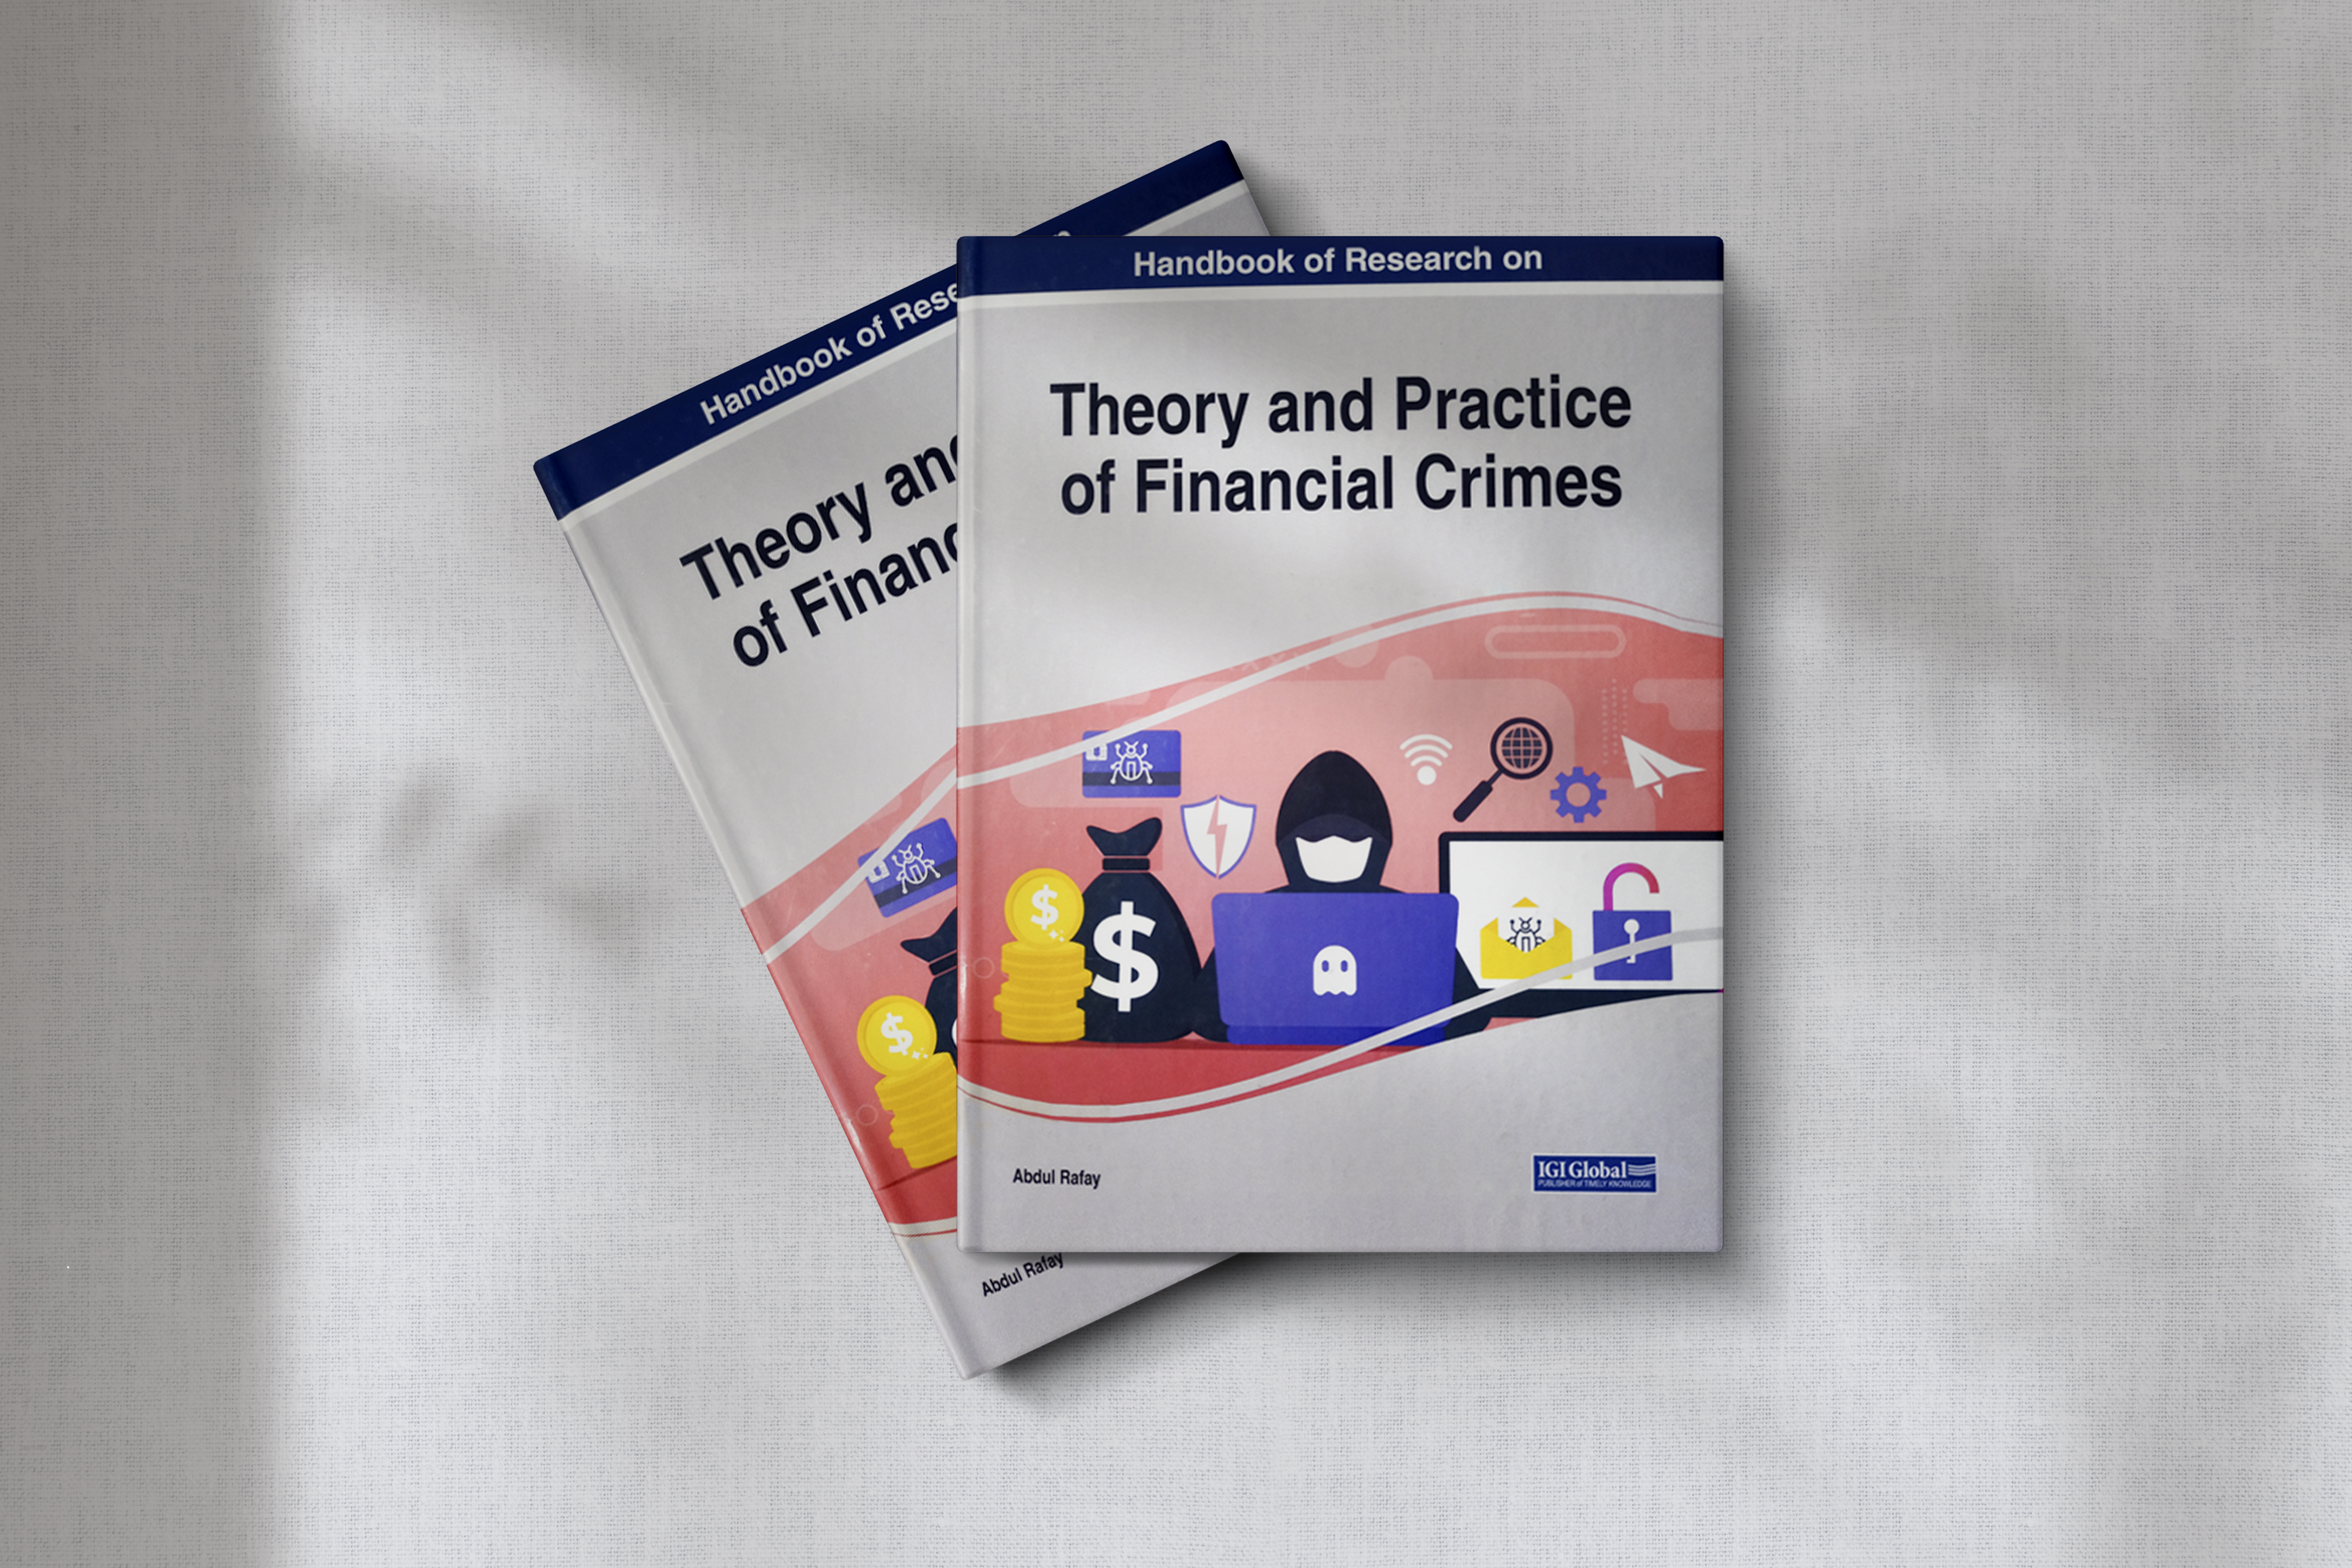 Handbook of Research on Theory and Practice of Financials Crimes